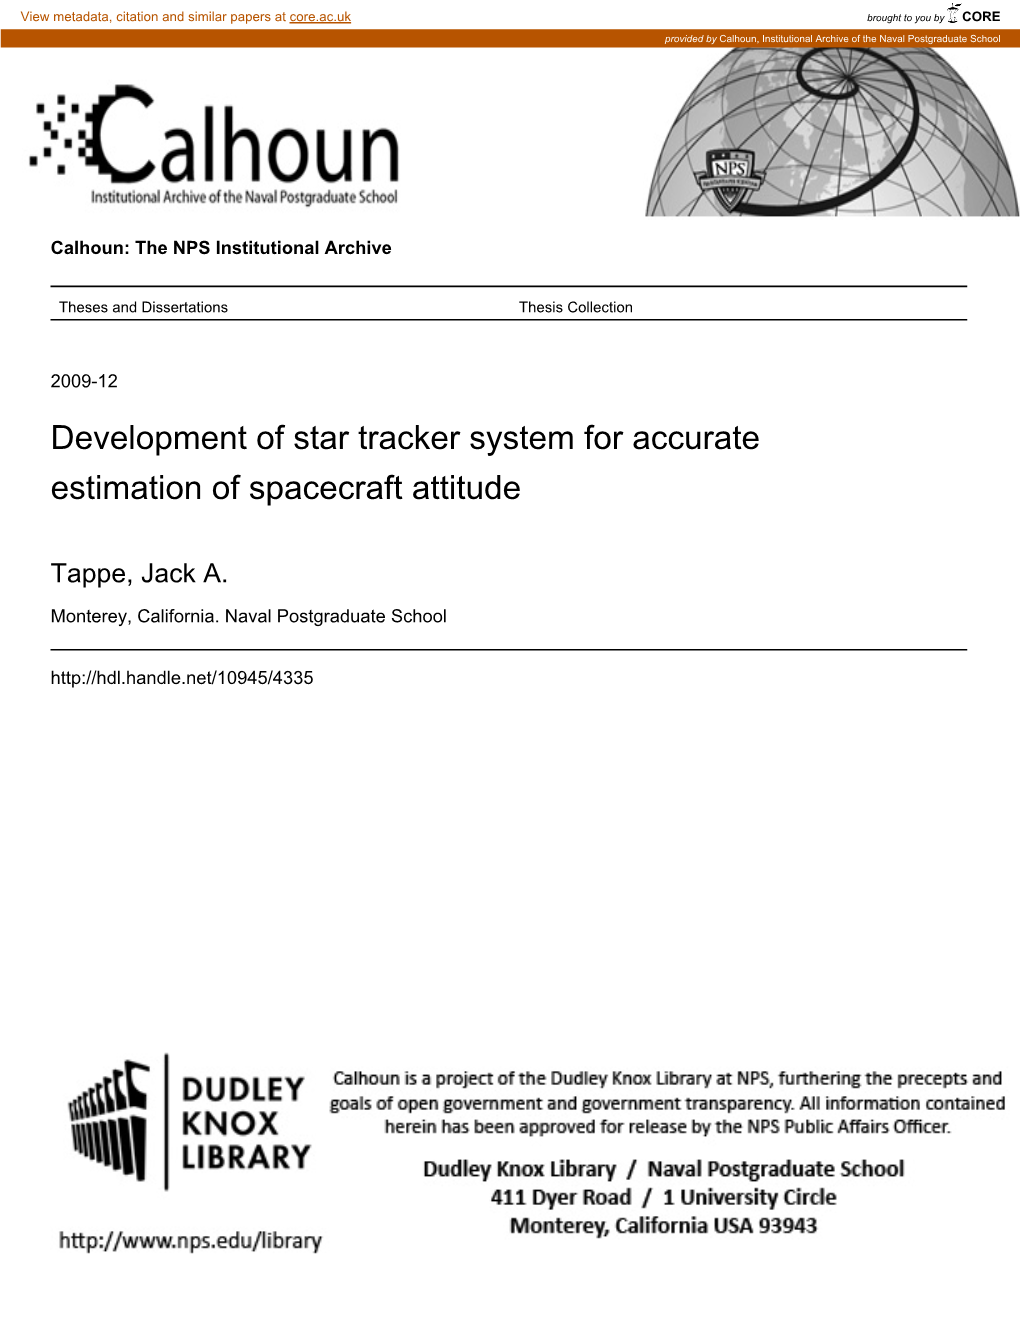 Development of Star Tracker System for Accurate Estimation of Spacecraft Attitude